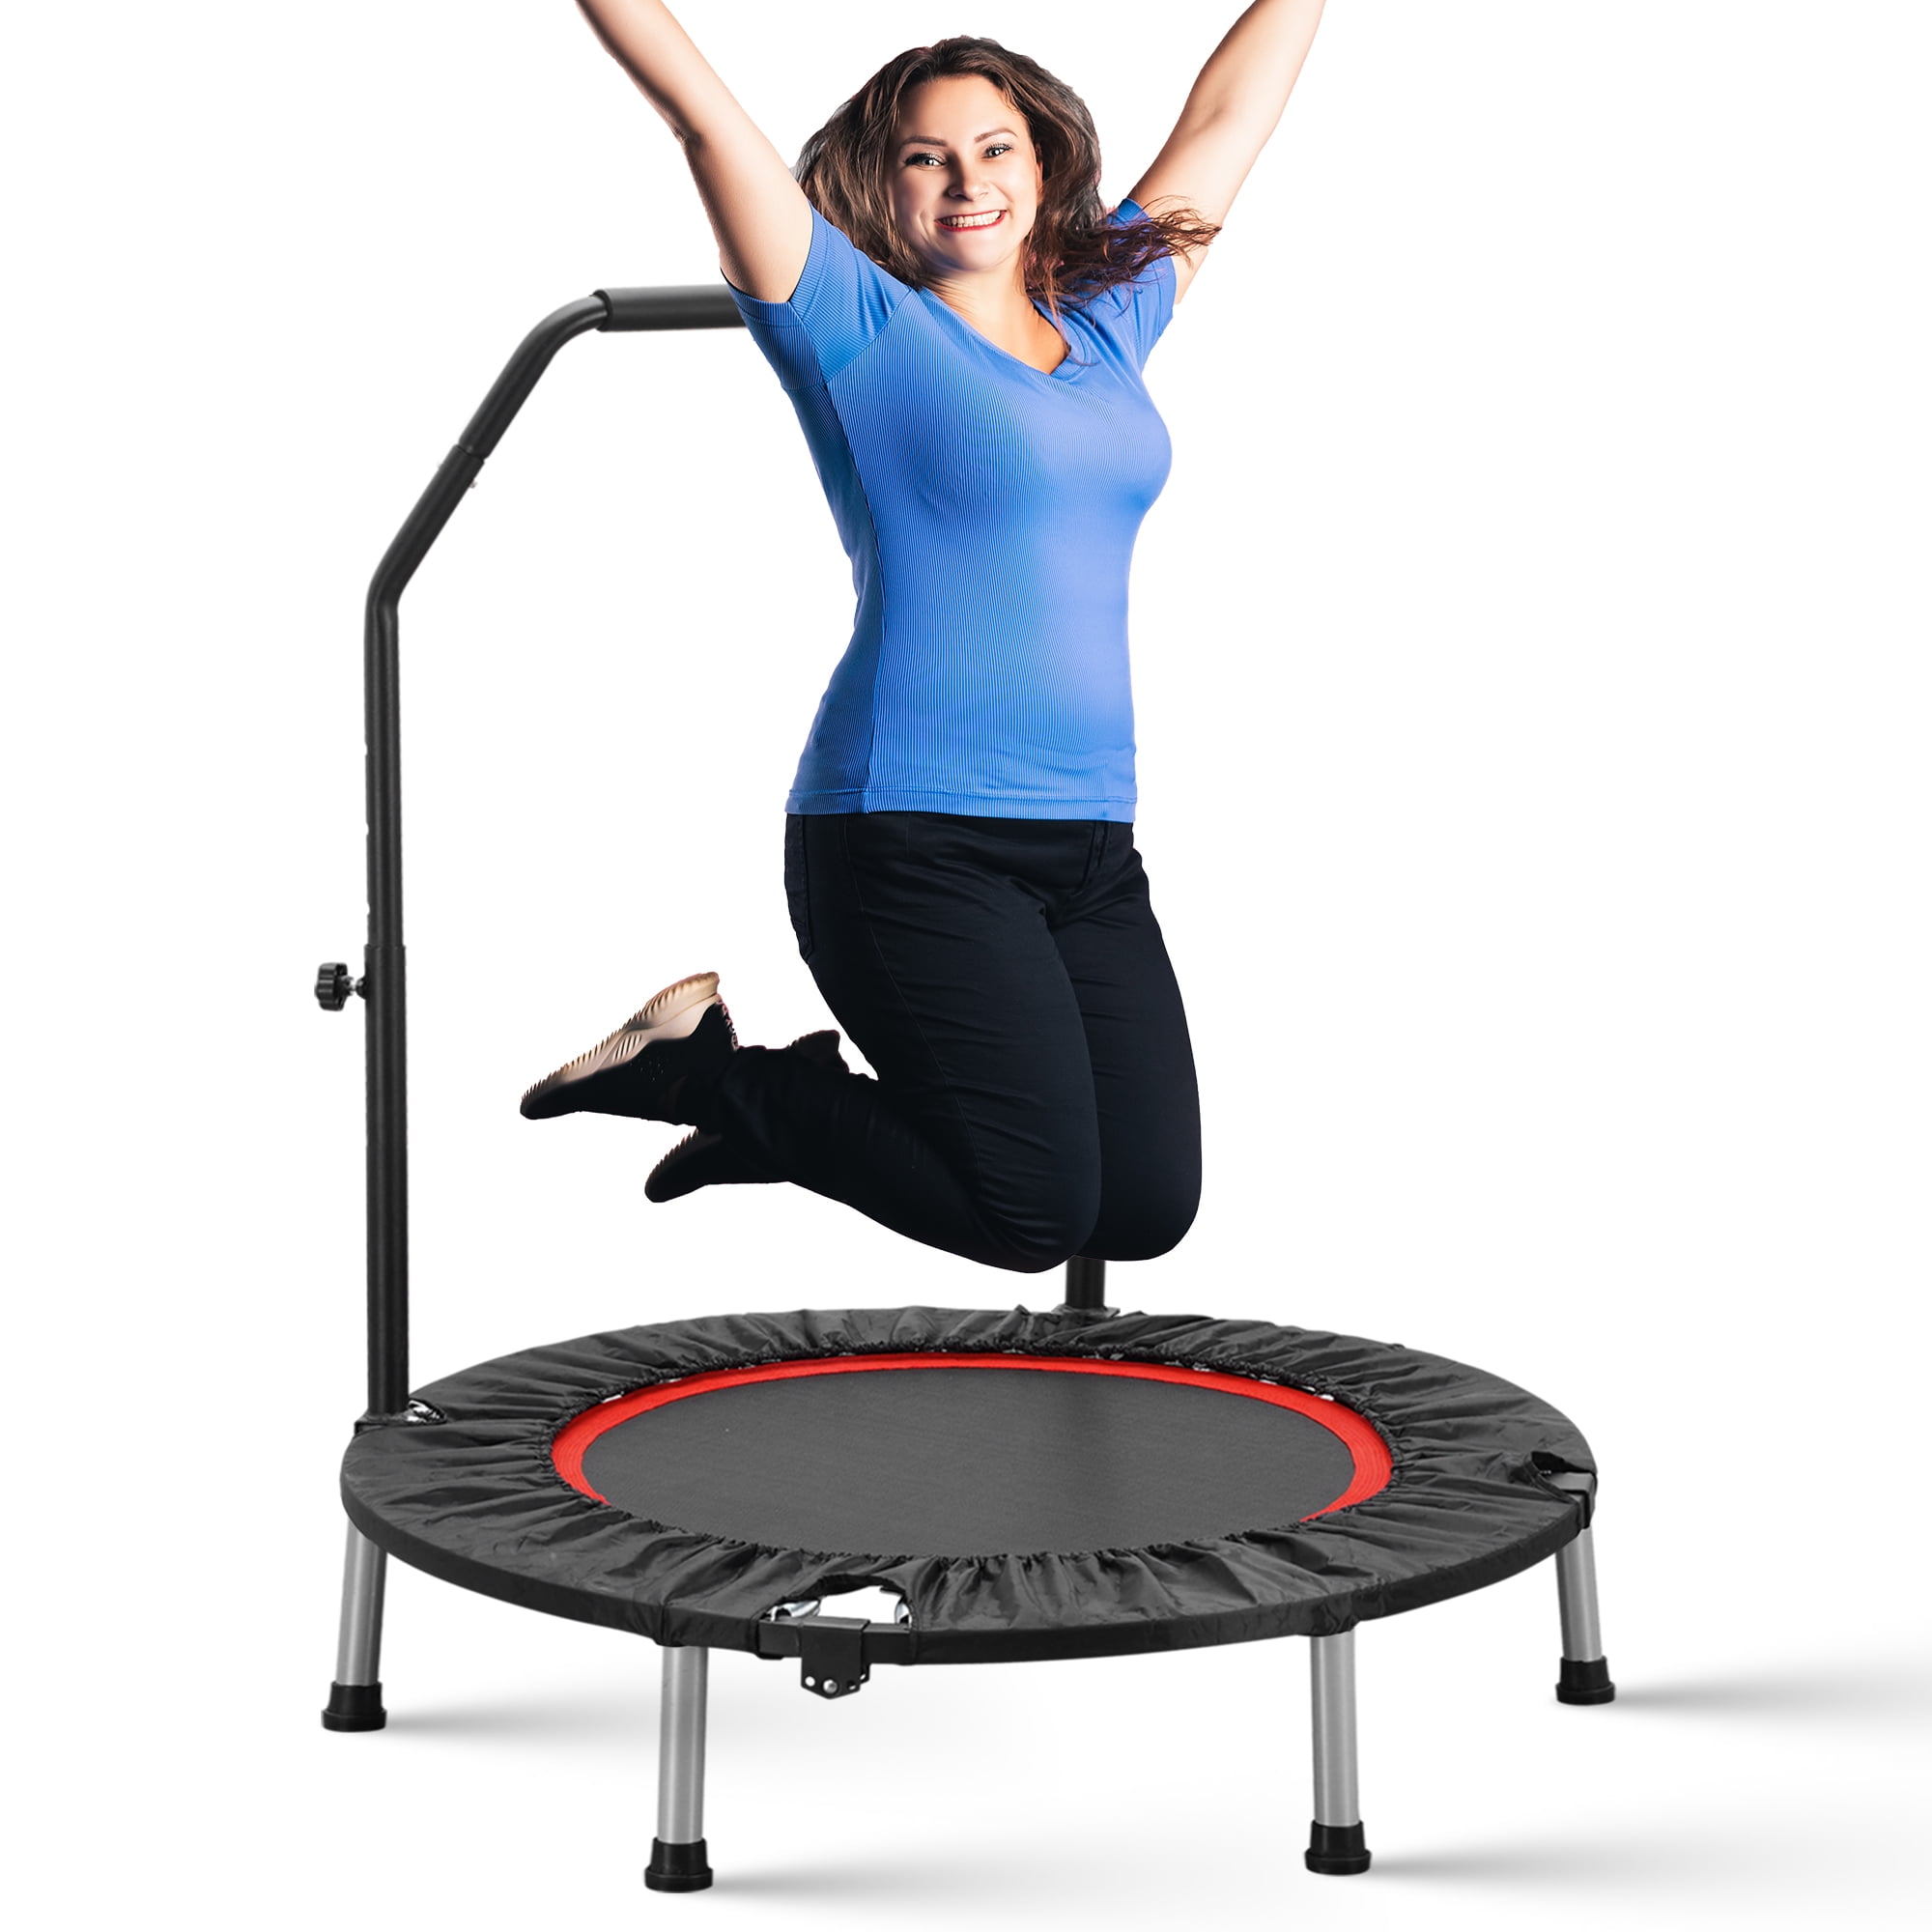 ZENOVA 40" Mini Trampoline for Adults and Kids Fitness, Indoor Trampoline Rebounder Foam Handle for Bounce Workout Max Load 330lbs, Red and Black Walmart.com